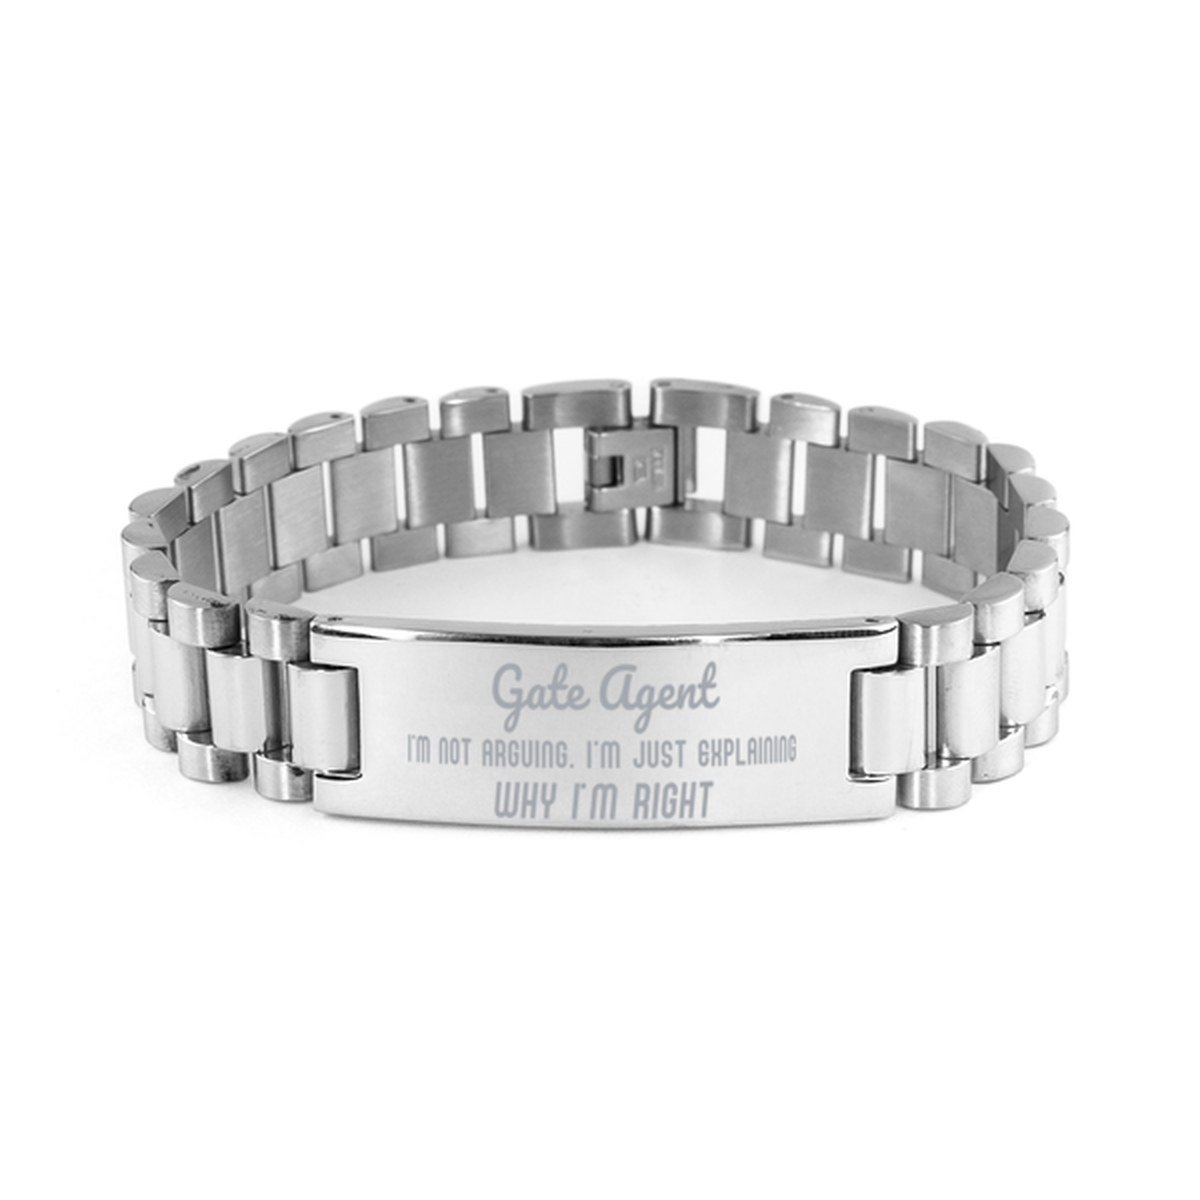 Gate Agent I'm not Arguing. I'm Just Explaining Why I'm RIGHT Ladder Stainless Steel Bracelet, Graduation Birthday Christmas Gate Agent Gifts For Gate Agent Funny Saying Quote Present for Men Women Coworker